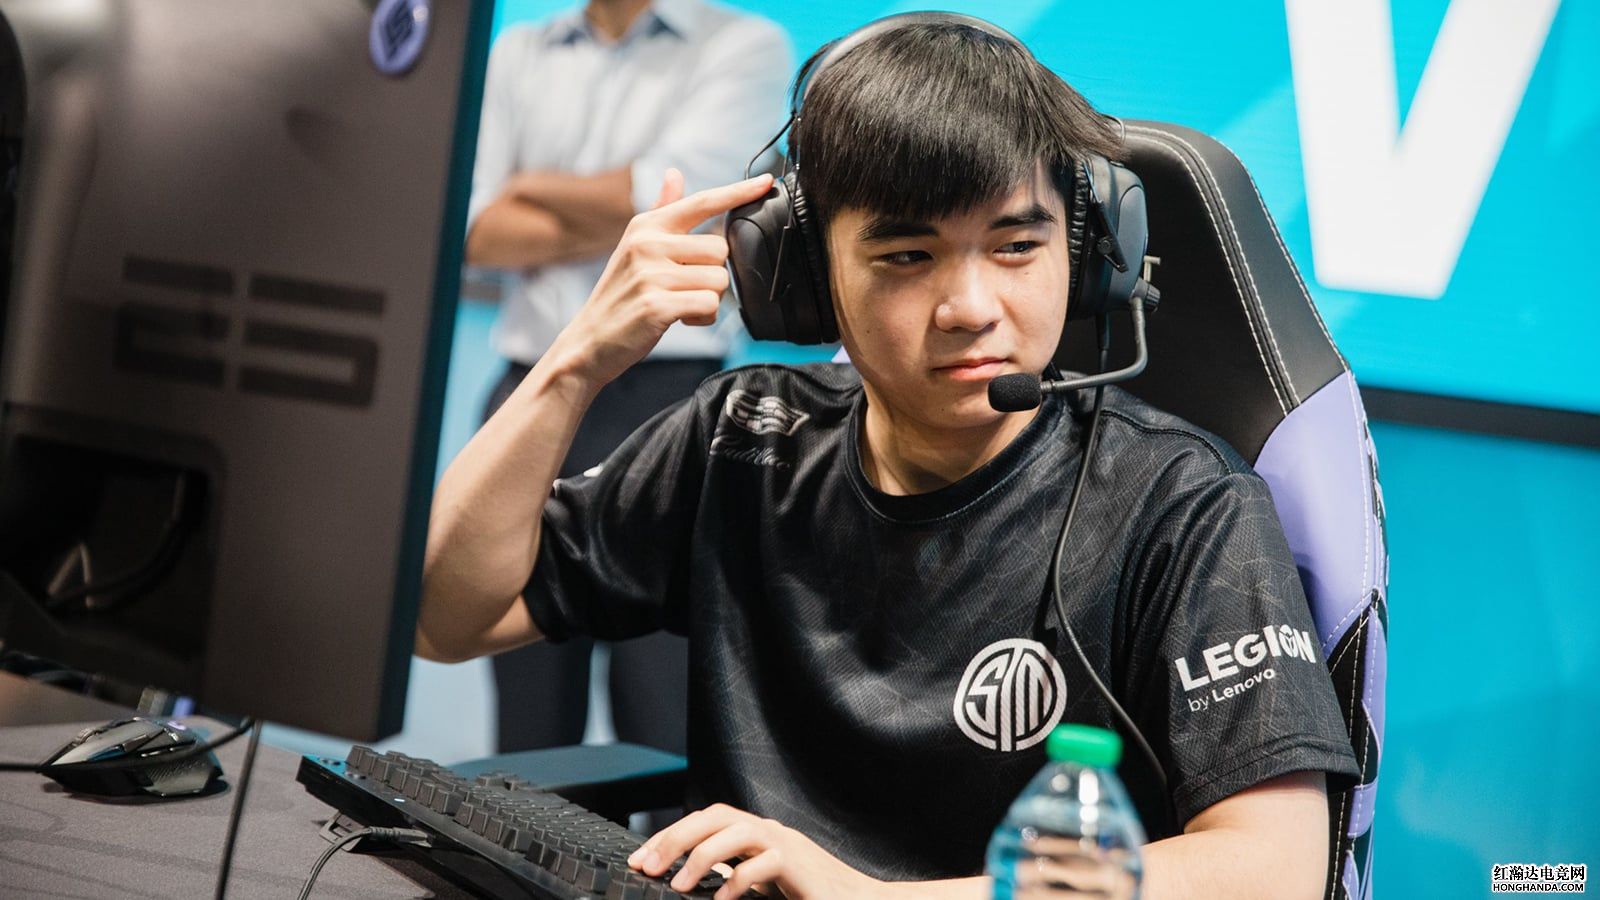 spica-released-by-tsm-after-four-years-with-lcs-org-will-hit-league-free-agency-heading-into-2023-season.jpg